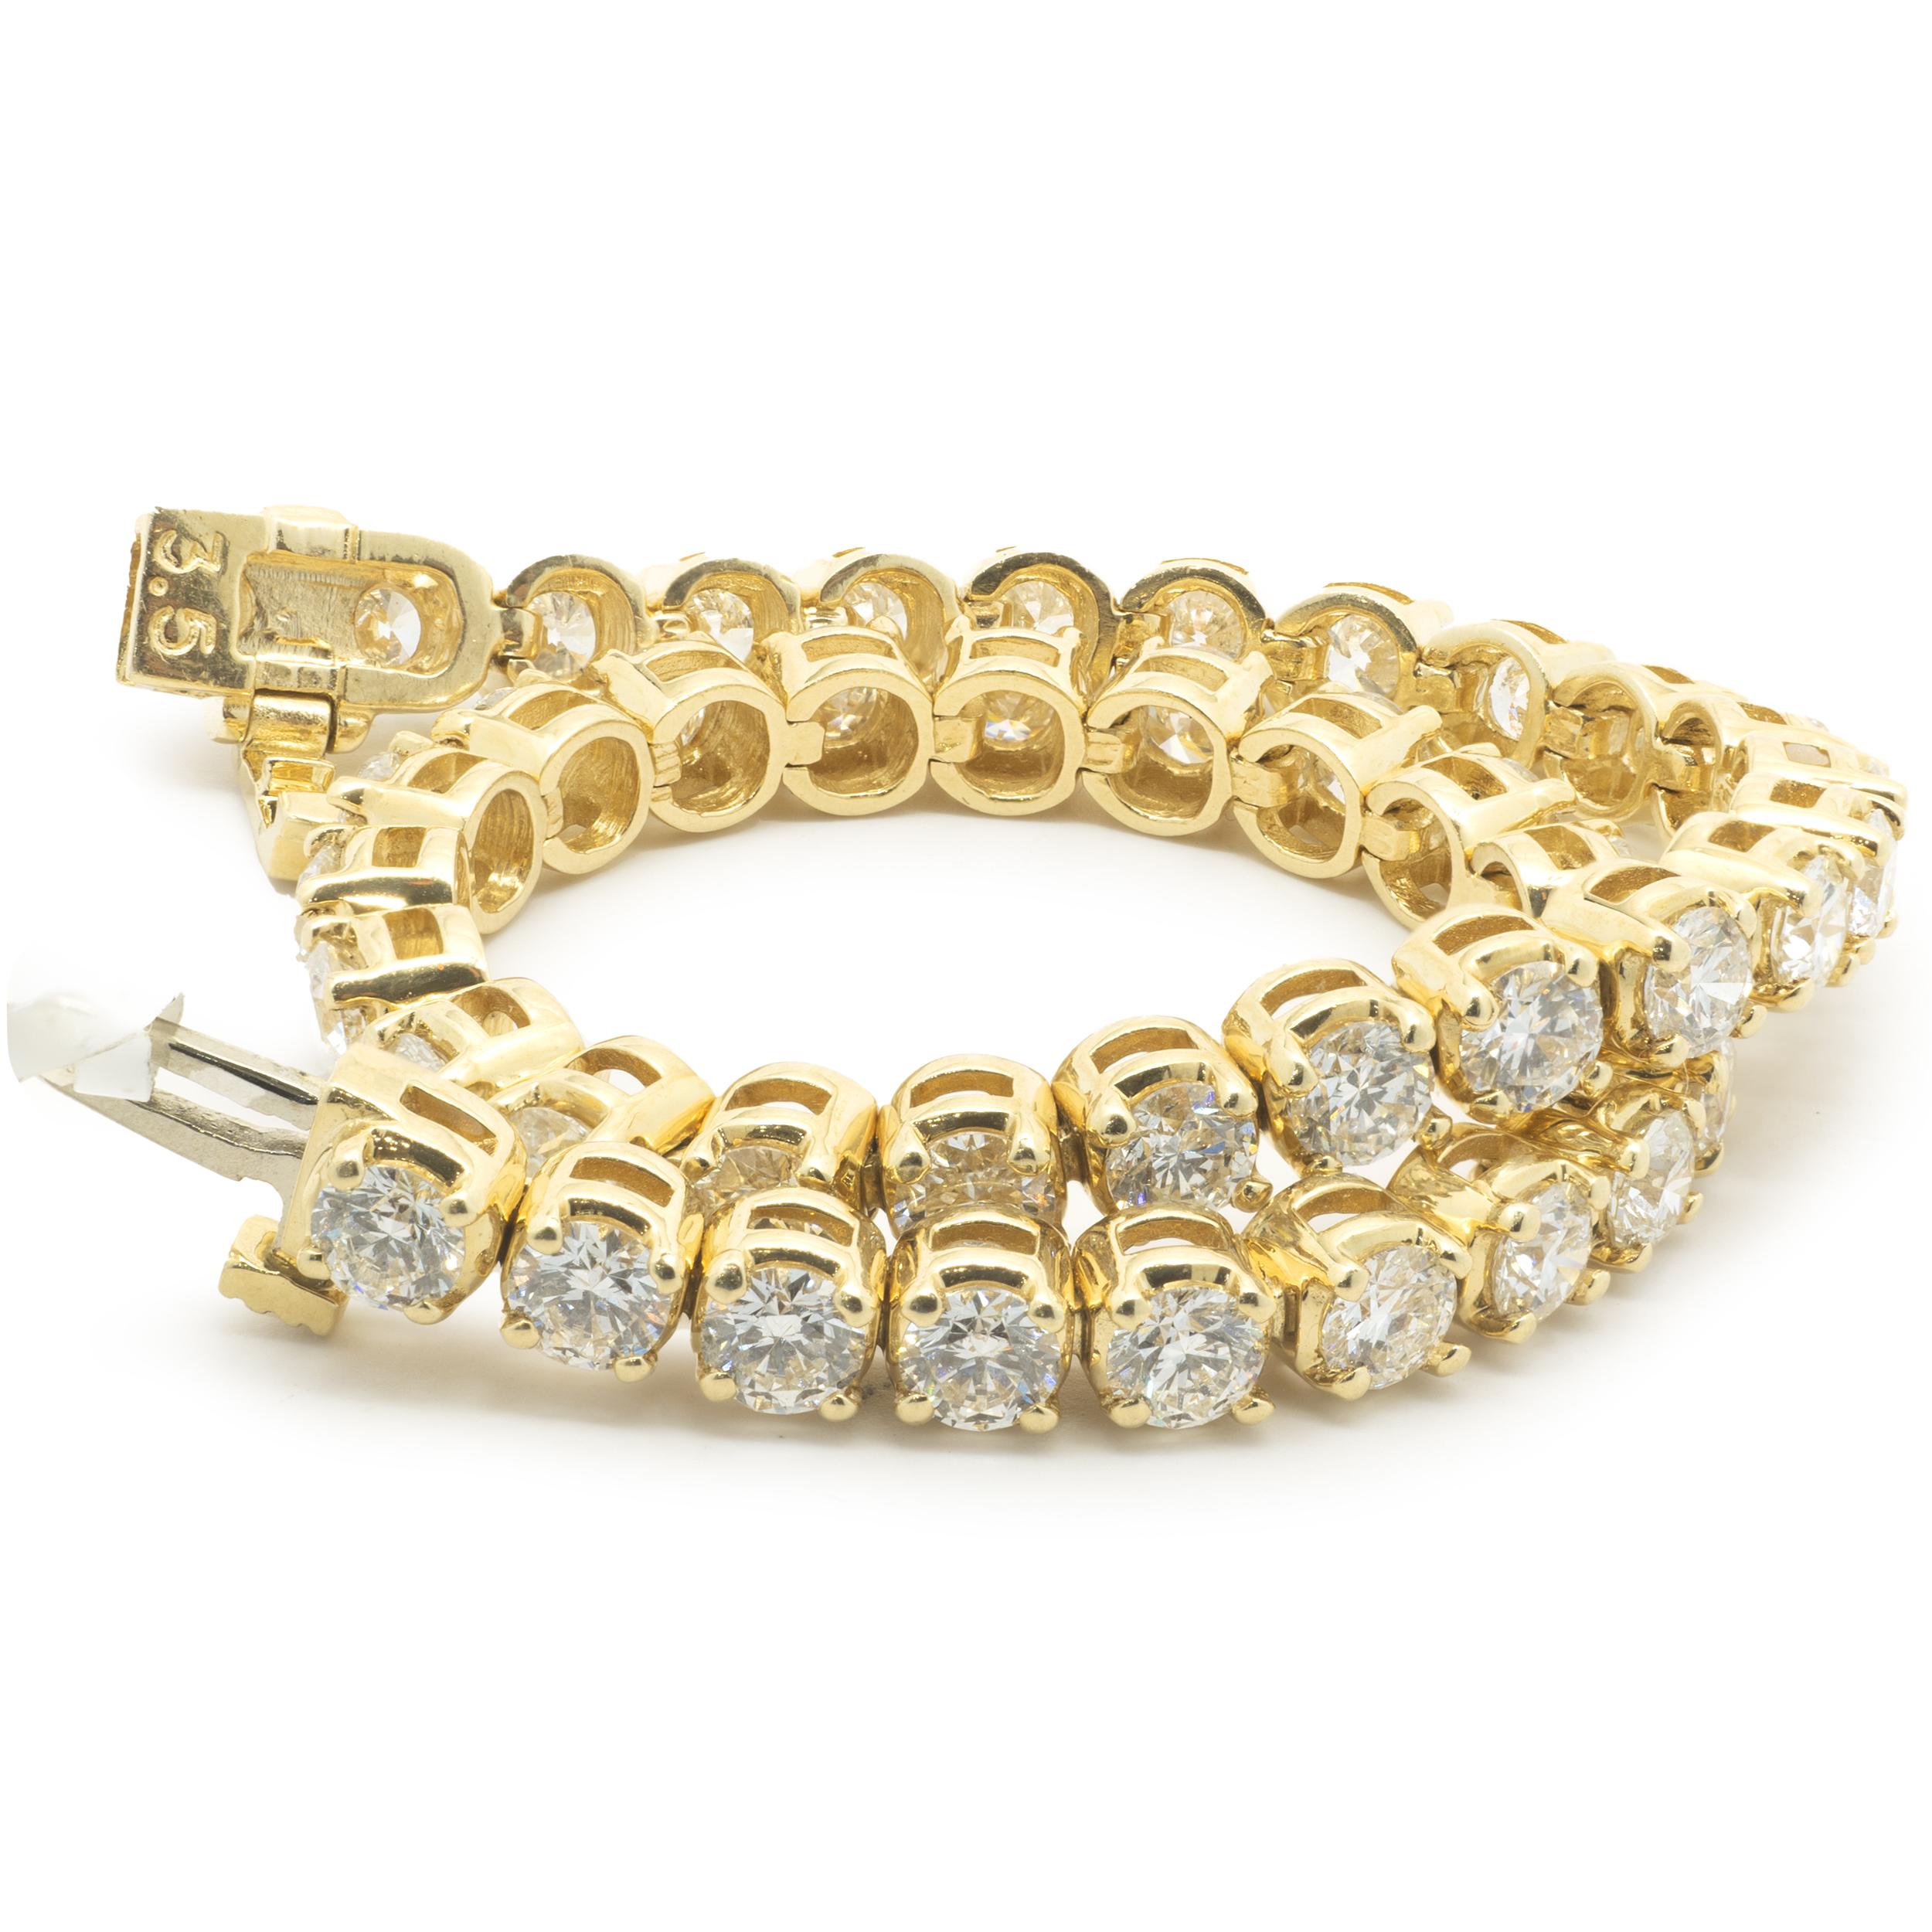 Designer: custom
Material: 14K yellow gold
Diamonds: 52 round brilliant cut = 7.00cttw
Color: H
Clarity: SI1
Dimensions: bracelet will fit up to an 7-inch wrist
Weight: 14.81 grams
